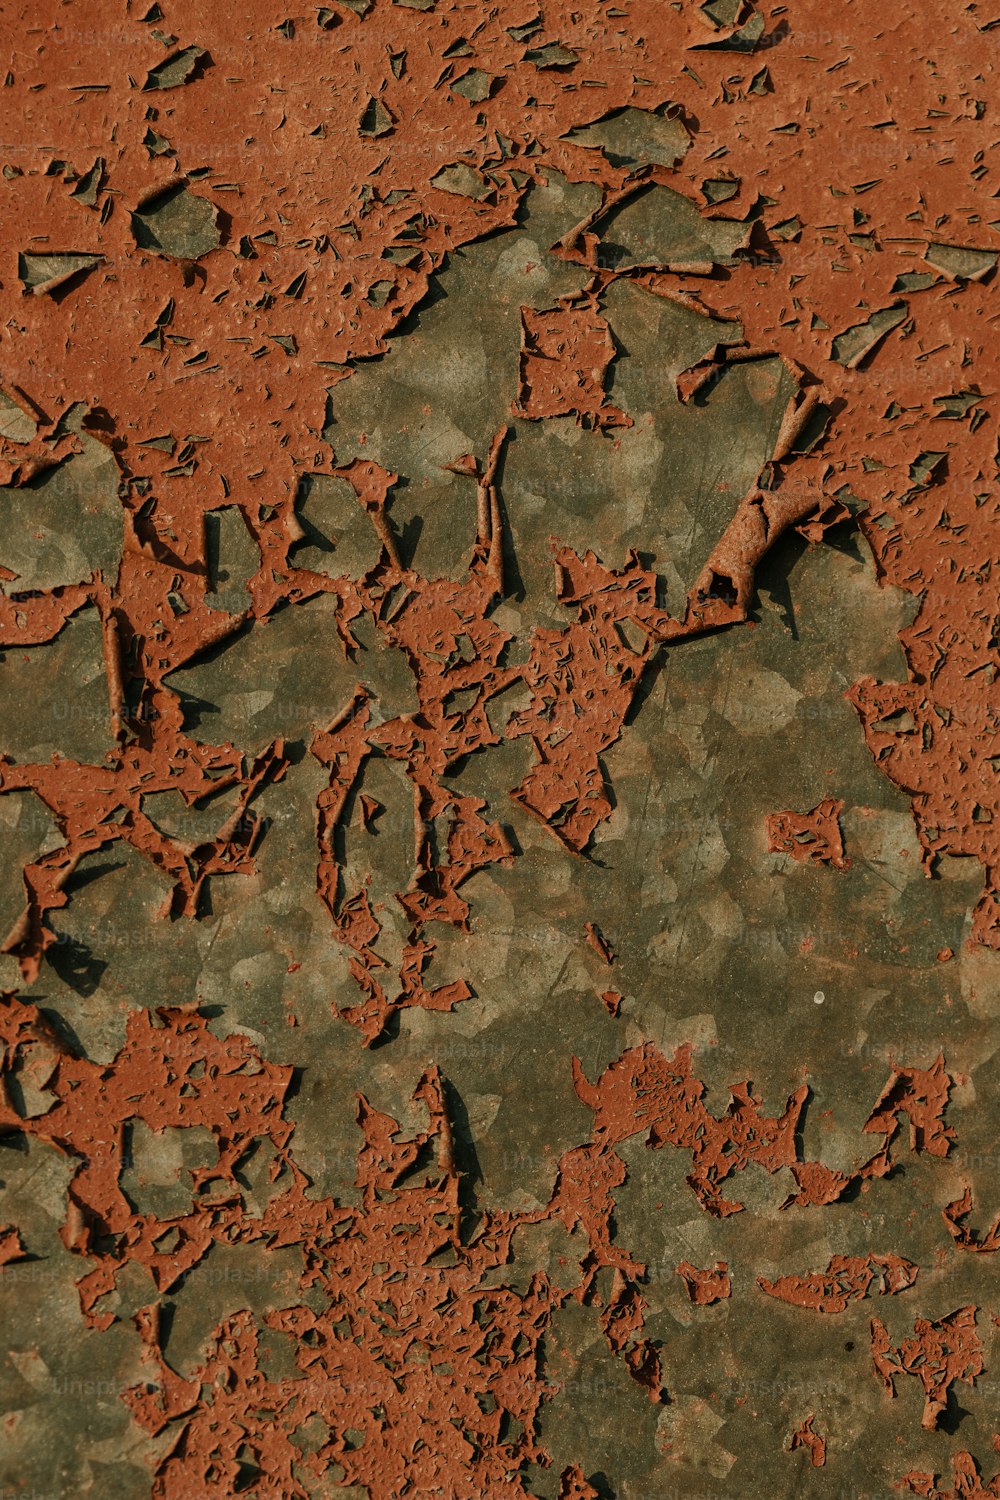 a close up of a dirt surface with small cracks